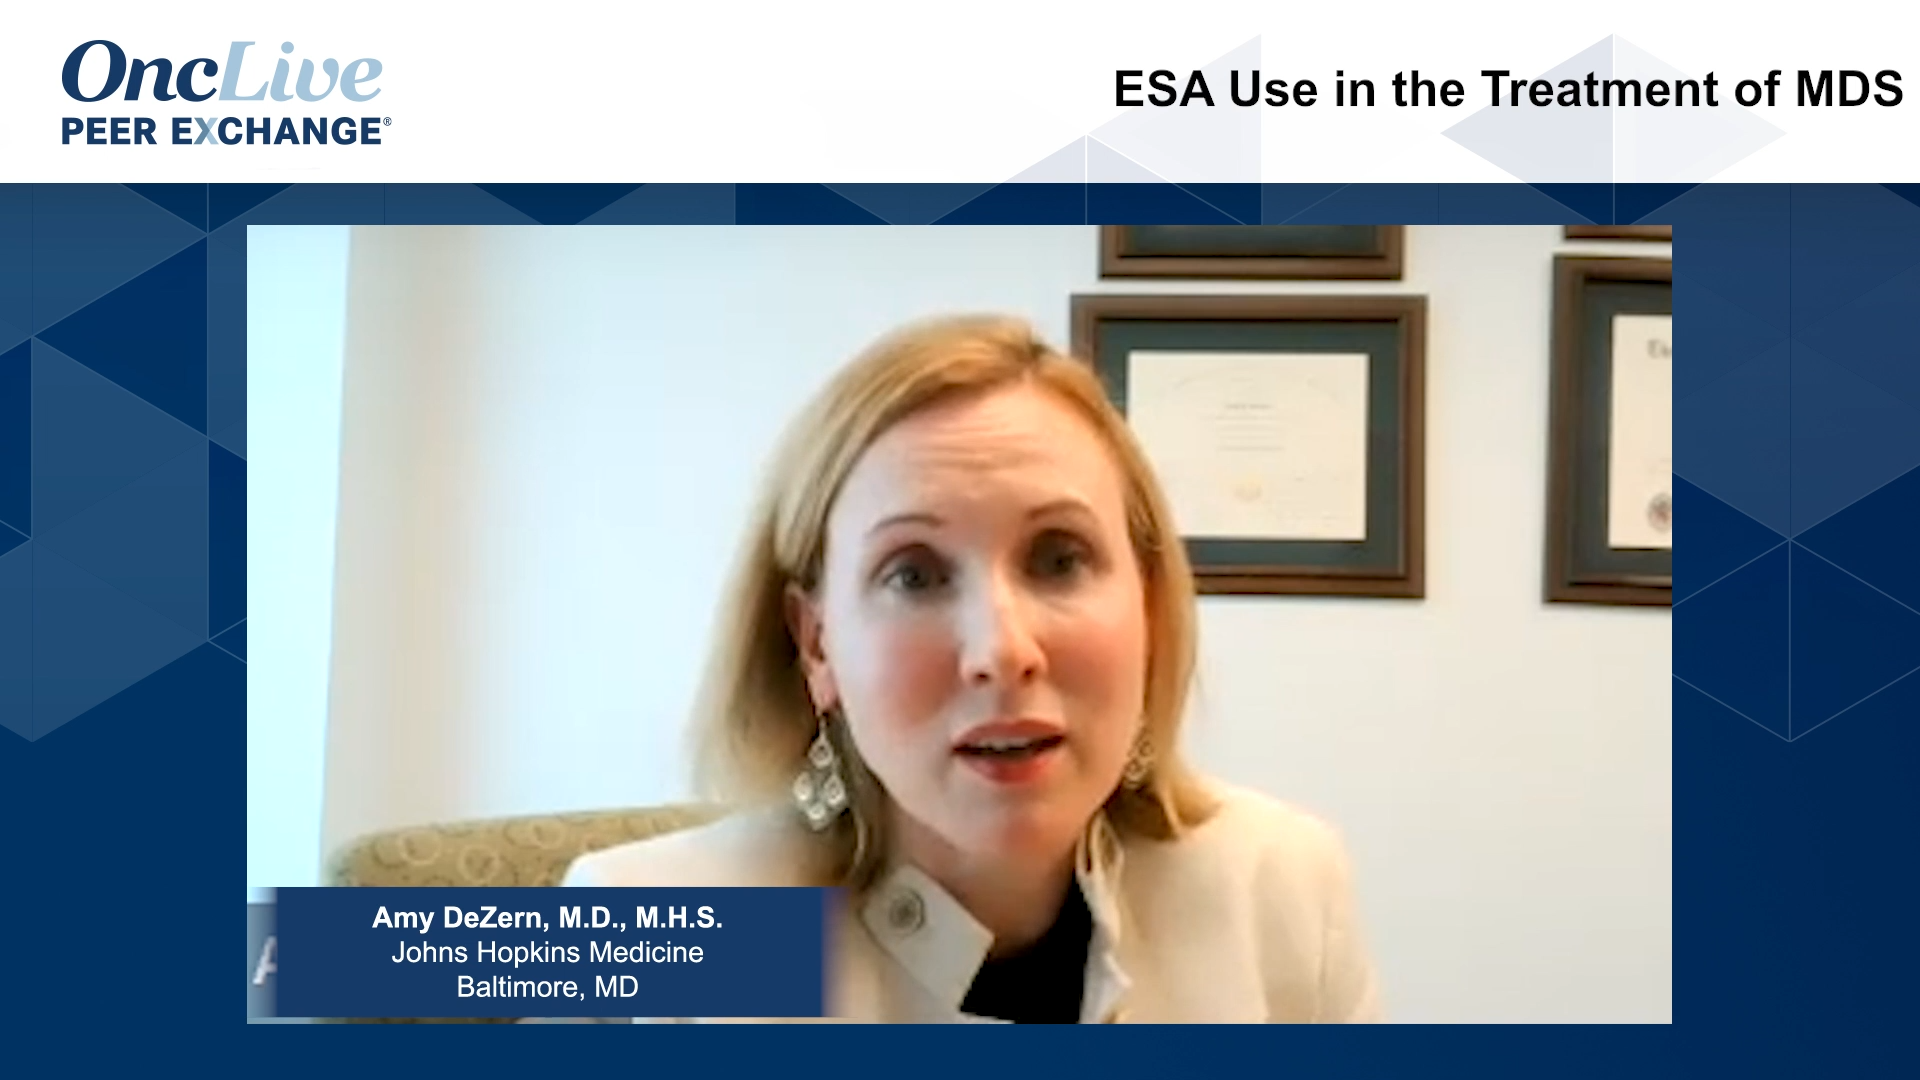 ESA Use in the Treatment of MDS